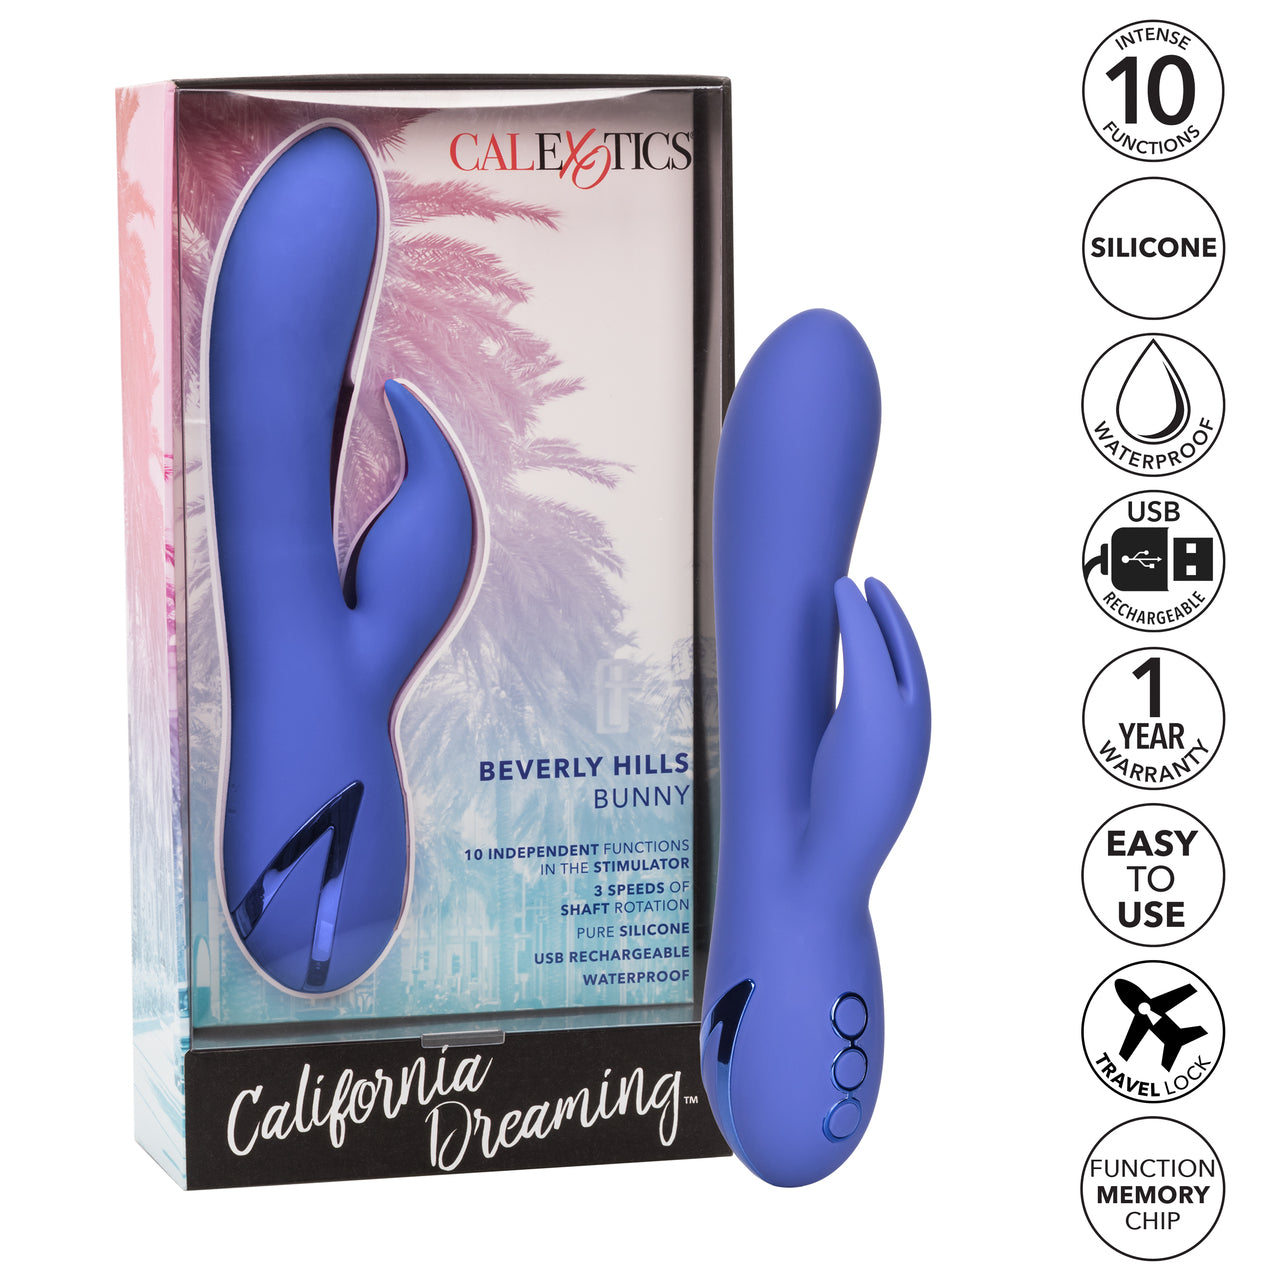 California Dreaming Beverly Hills Bunny Vibrator - Thorn & Feather